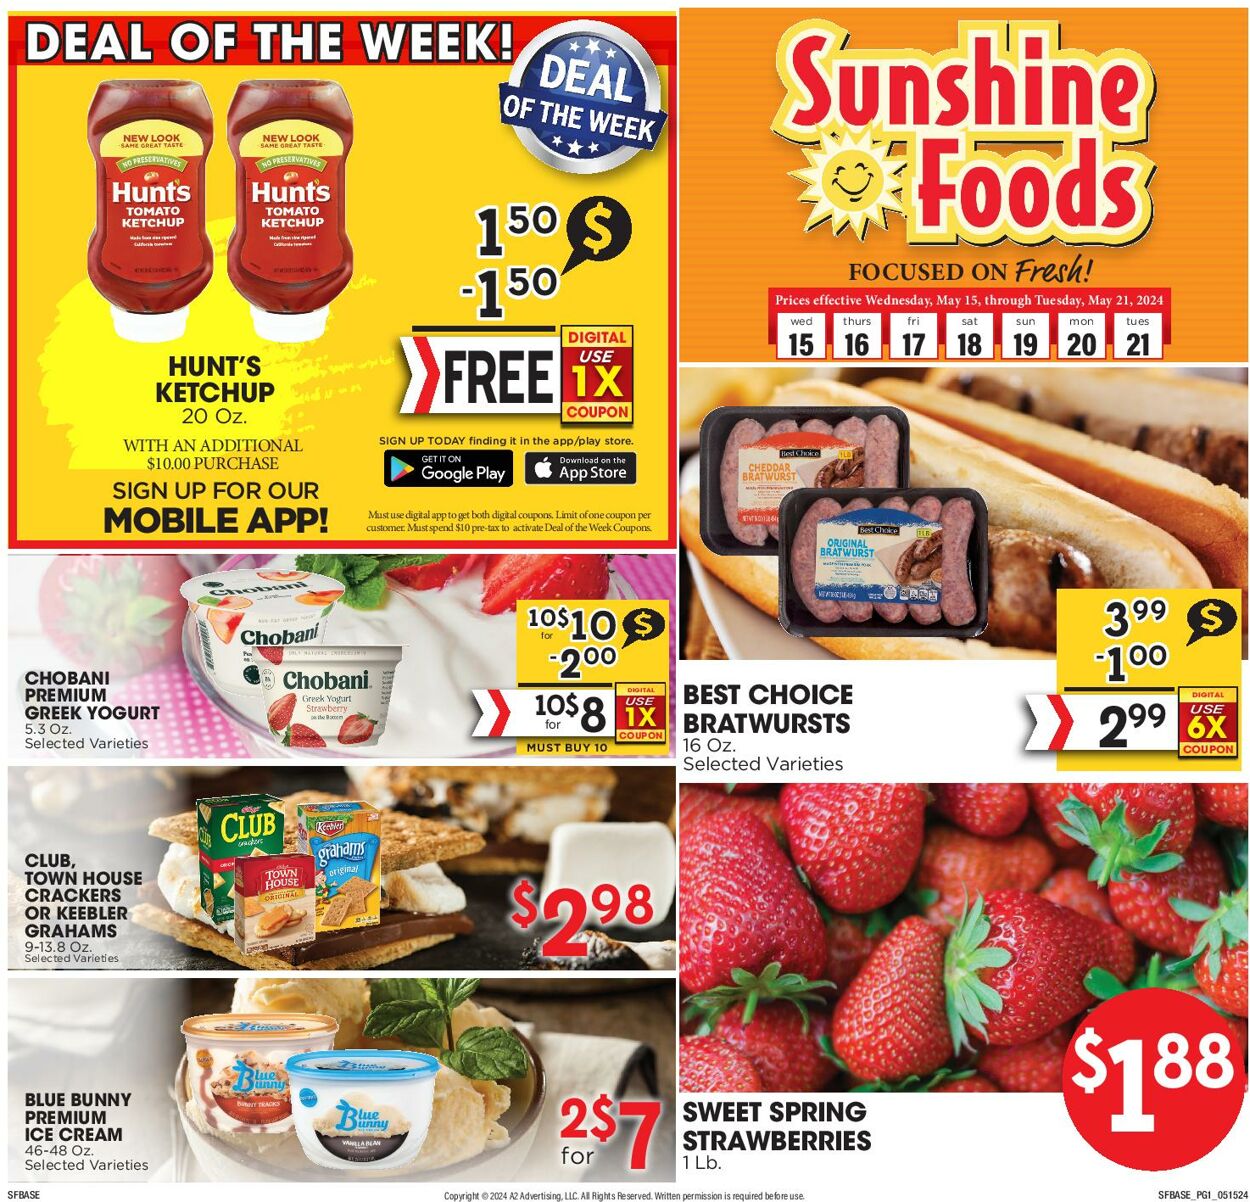 Sunshine Foods Promotional weekly ads